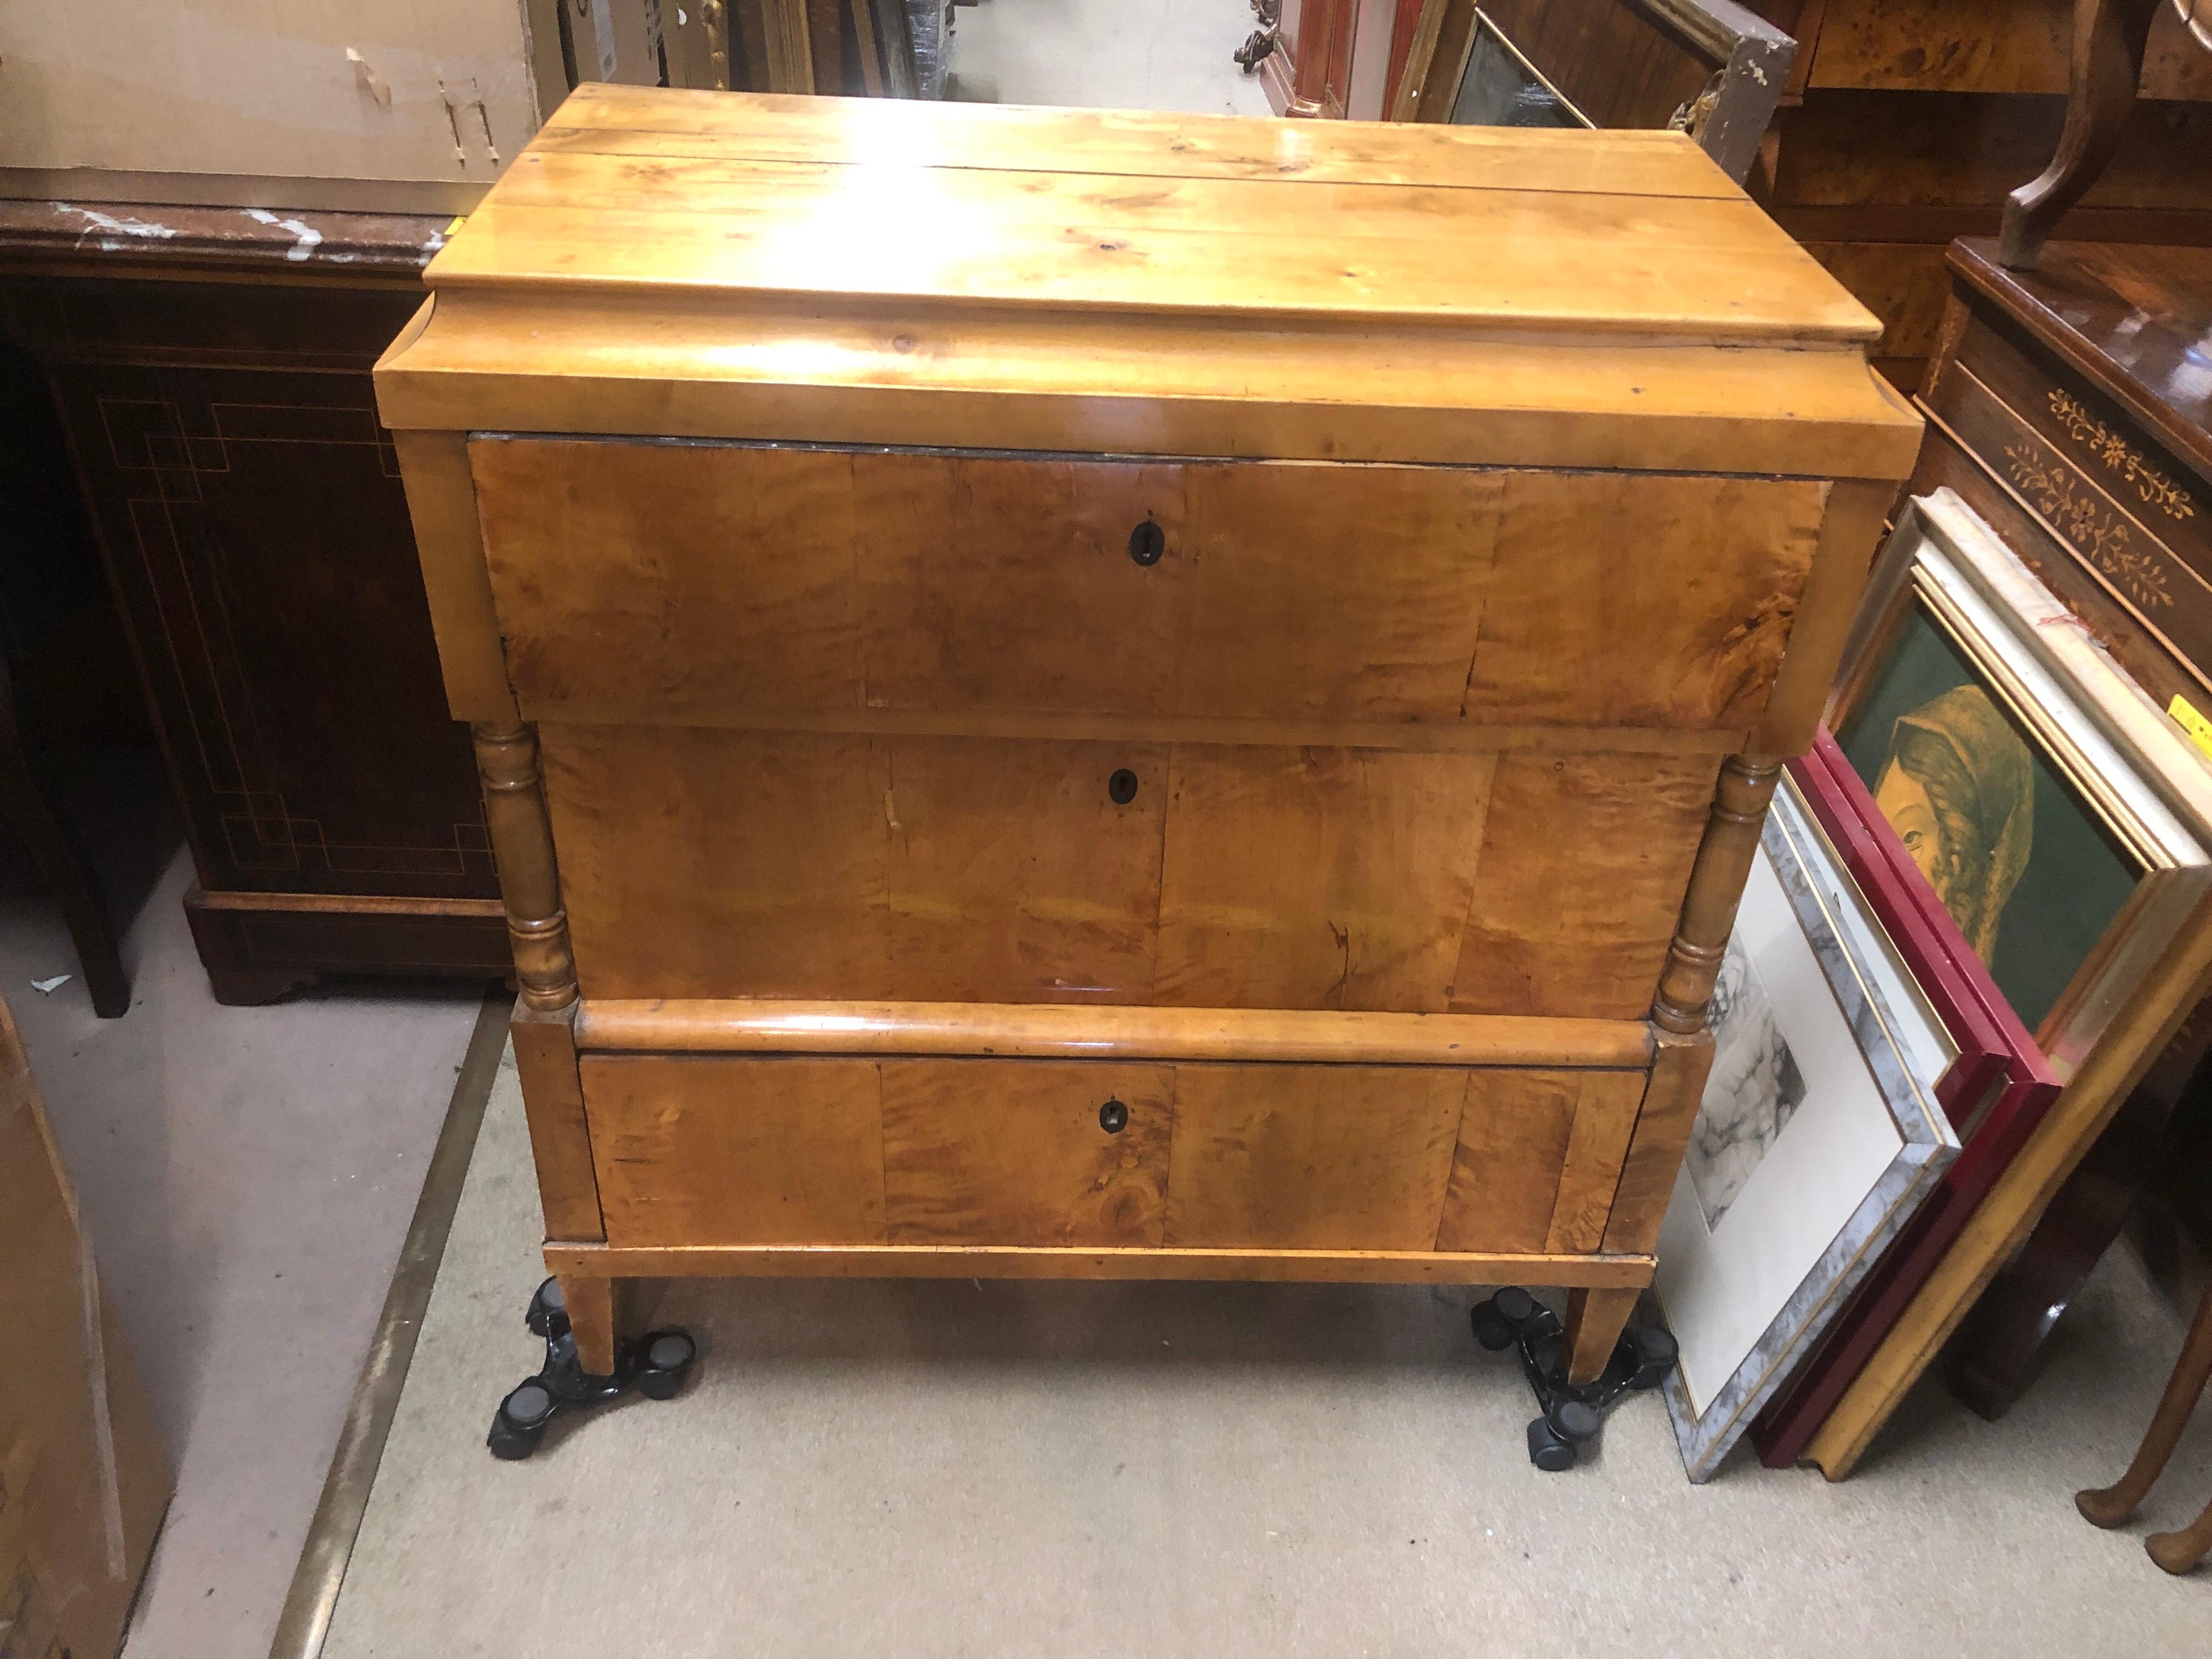 Fantastic chest of drawers of Swedish origin, Biedermeier period, circa 1830. Made of birch wood with ebonized inner part. The first drawer hides a folding shelf with drawers inside, functional as a small desk.
Small in size, easy to insert in a